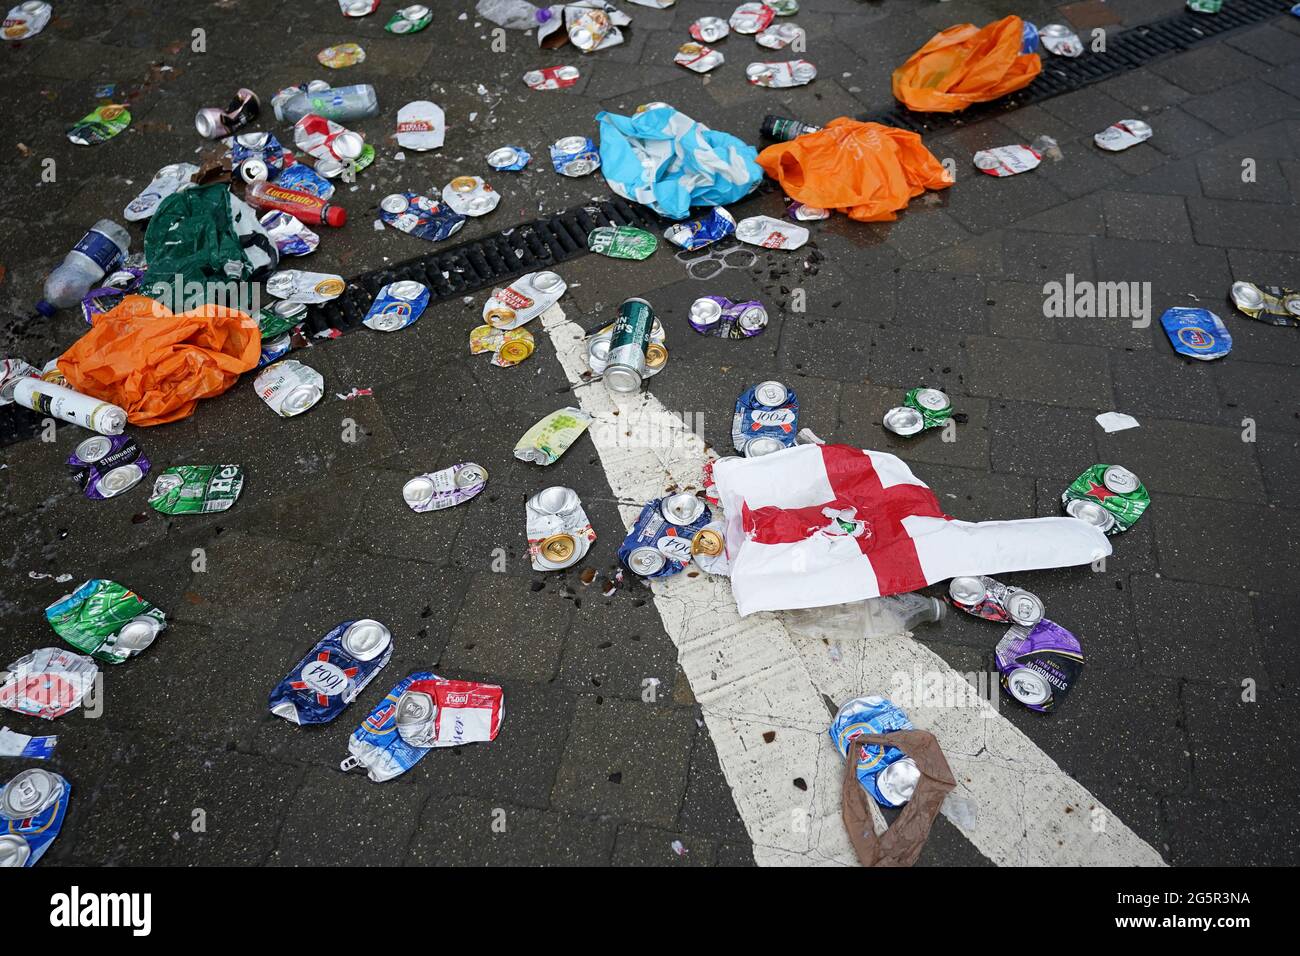 Litter left by fans ahead of the UEFA Euro 2020 round of 16 match between England and Germany at the 4TheFans fan zone outside Wembley Stadium. Picture date: Tuesday June 29, 2021. Stock Photo